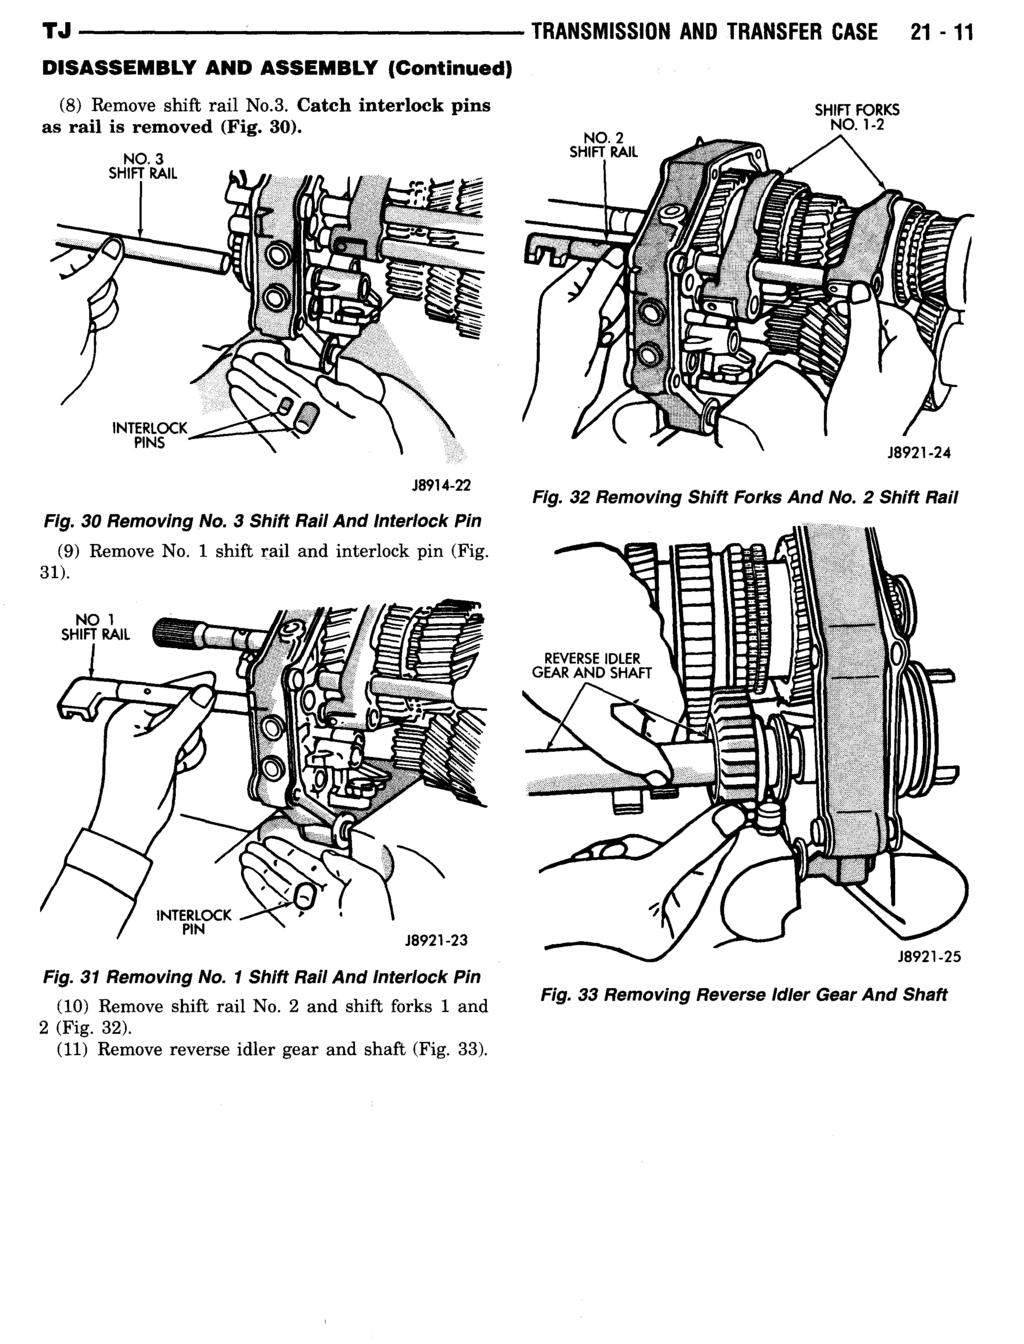 TRANSMISSION AND TRANSFER CASE 21-11 (8) Remove shift rail No.3. Catch interlock pins SHIFT FORKS as rail is removed (Fig. 30). NO. 2 - NO. 1-2 SHIFT RAIL J8921-24 J8914-22 30 Removing No.